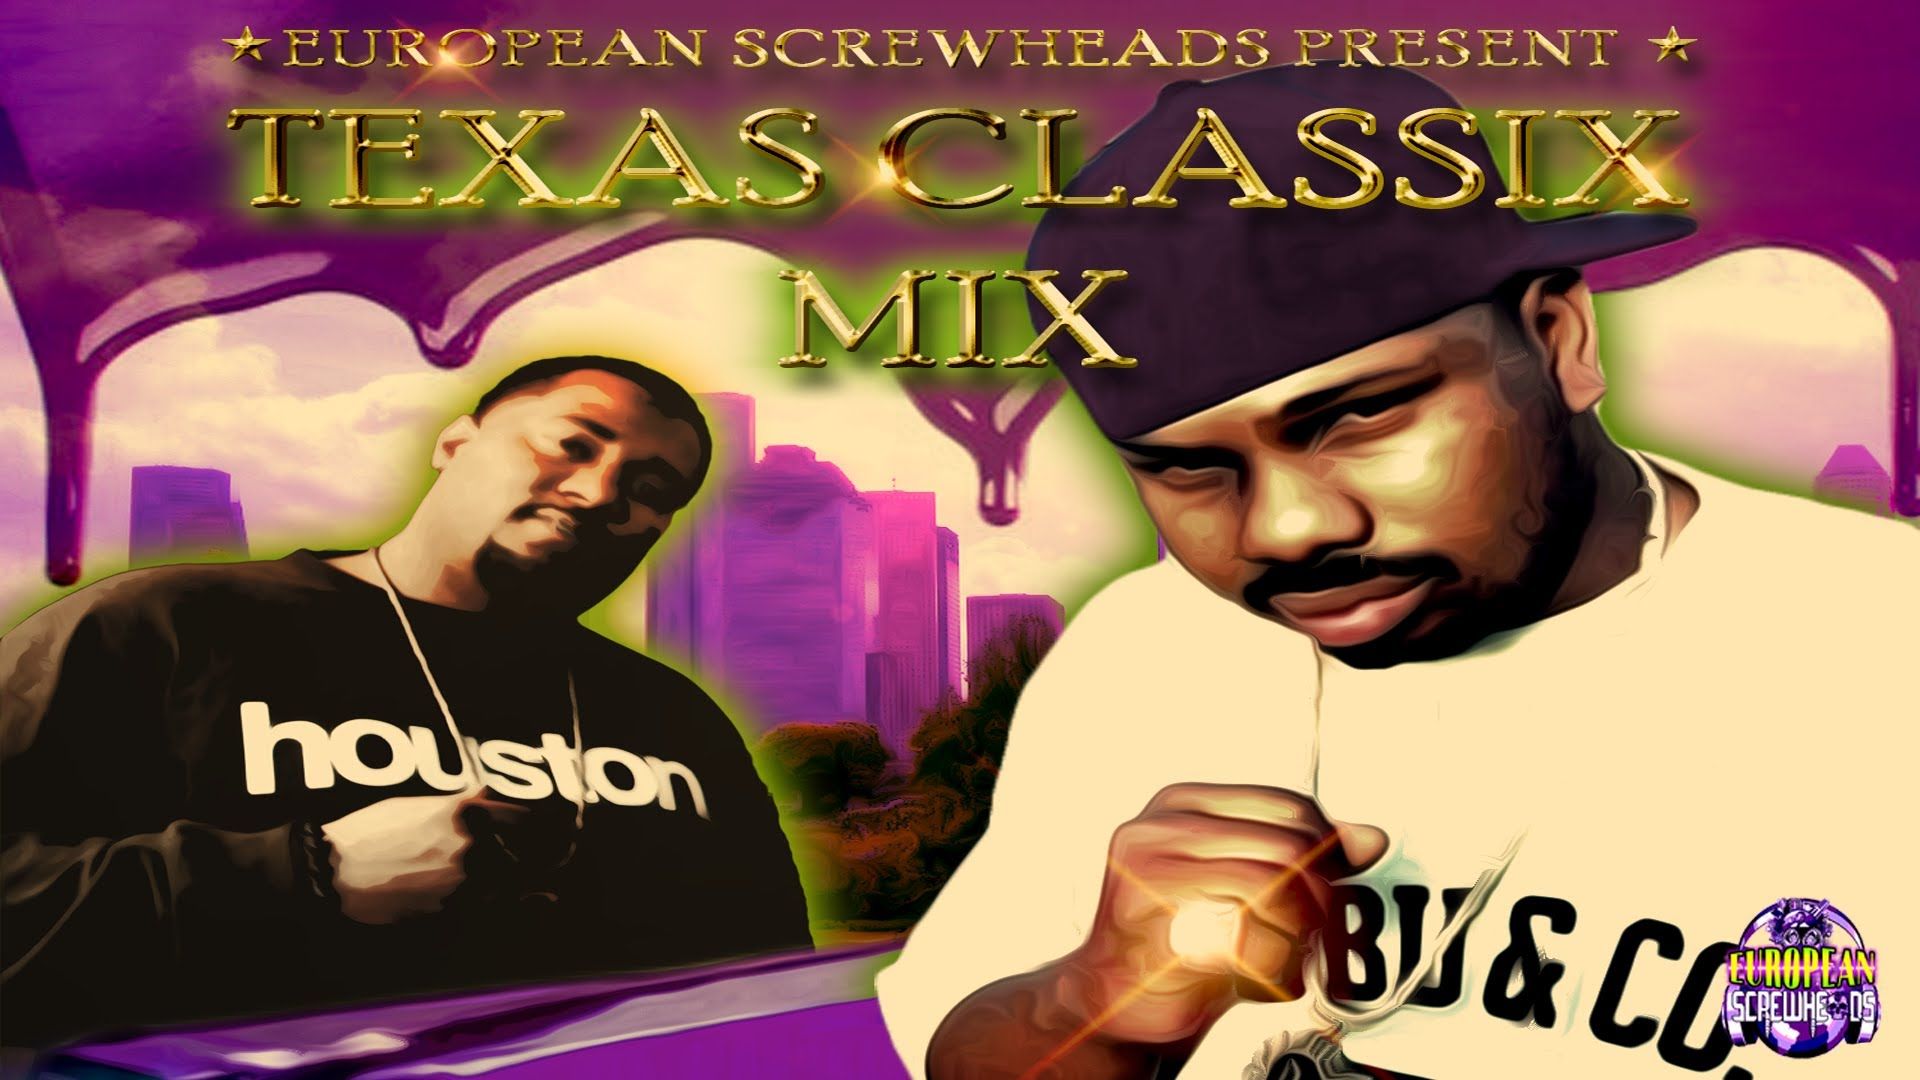 23 Nice DJ Screw Wallpapers in High Quality, Chesley Dudlestone.